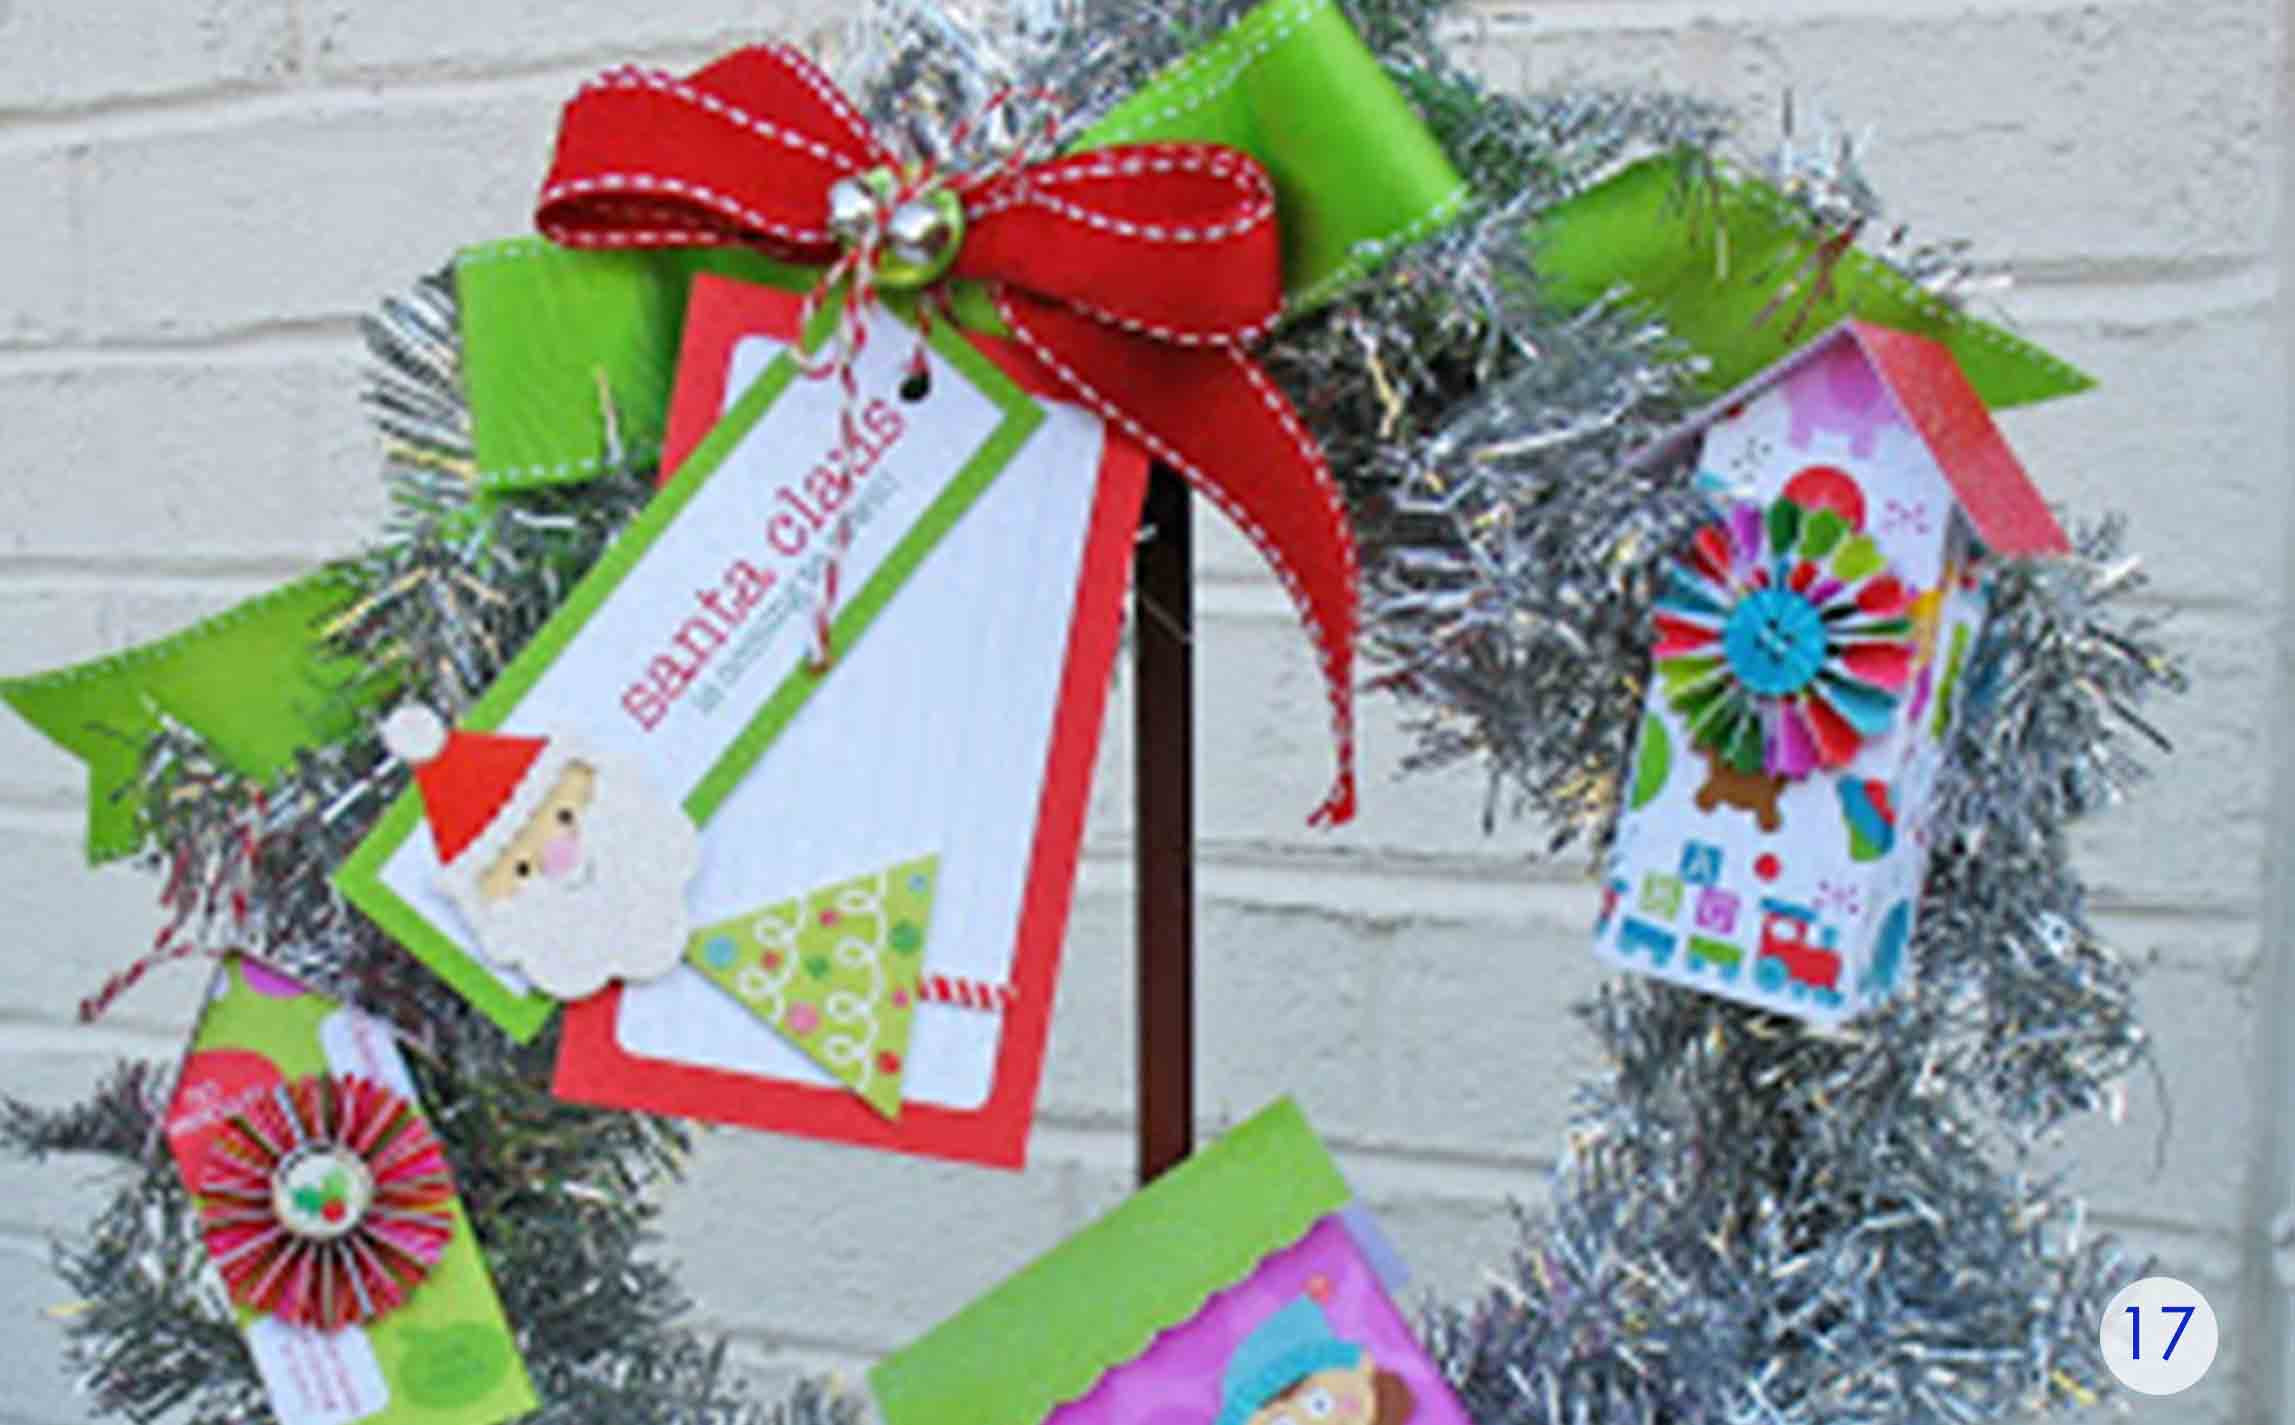 Holiday Gift Card Ideas
 The Best Gift Card Tree and Gift Card Wreaths Ever